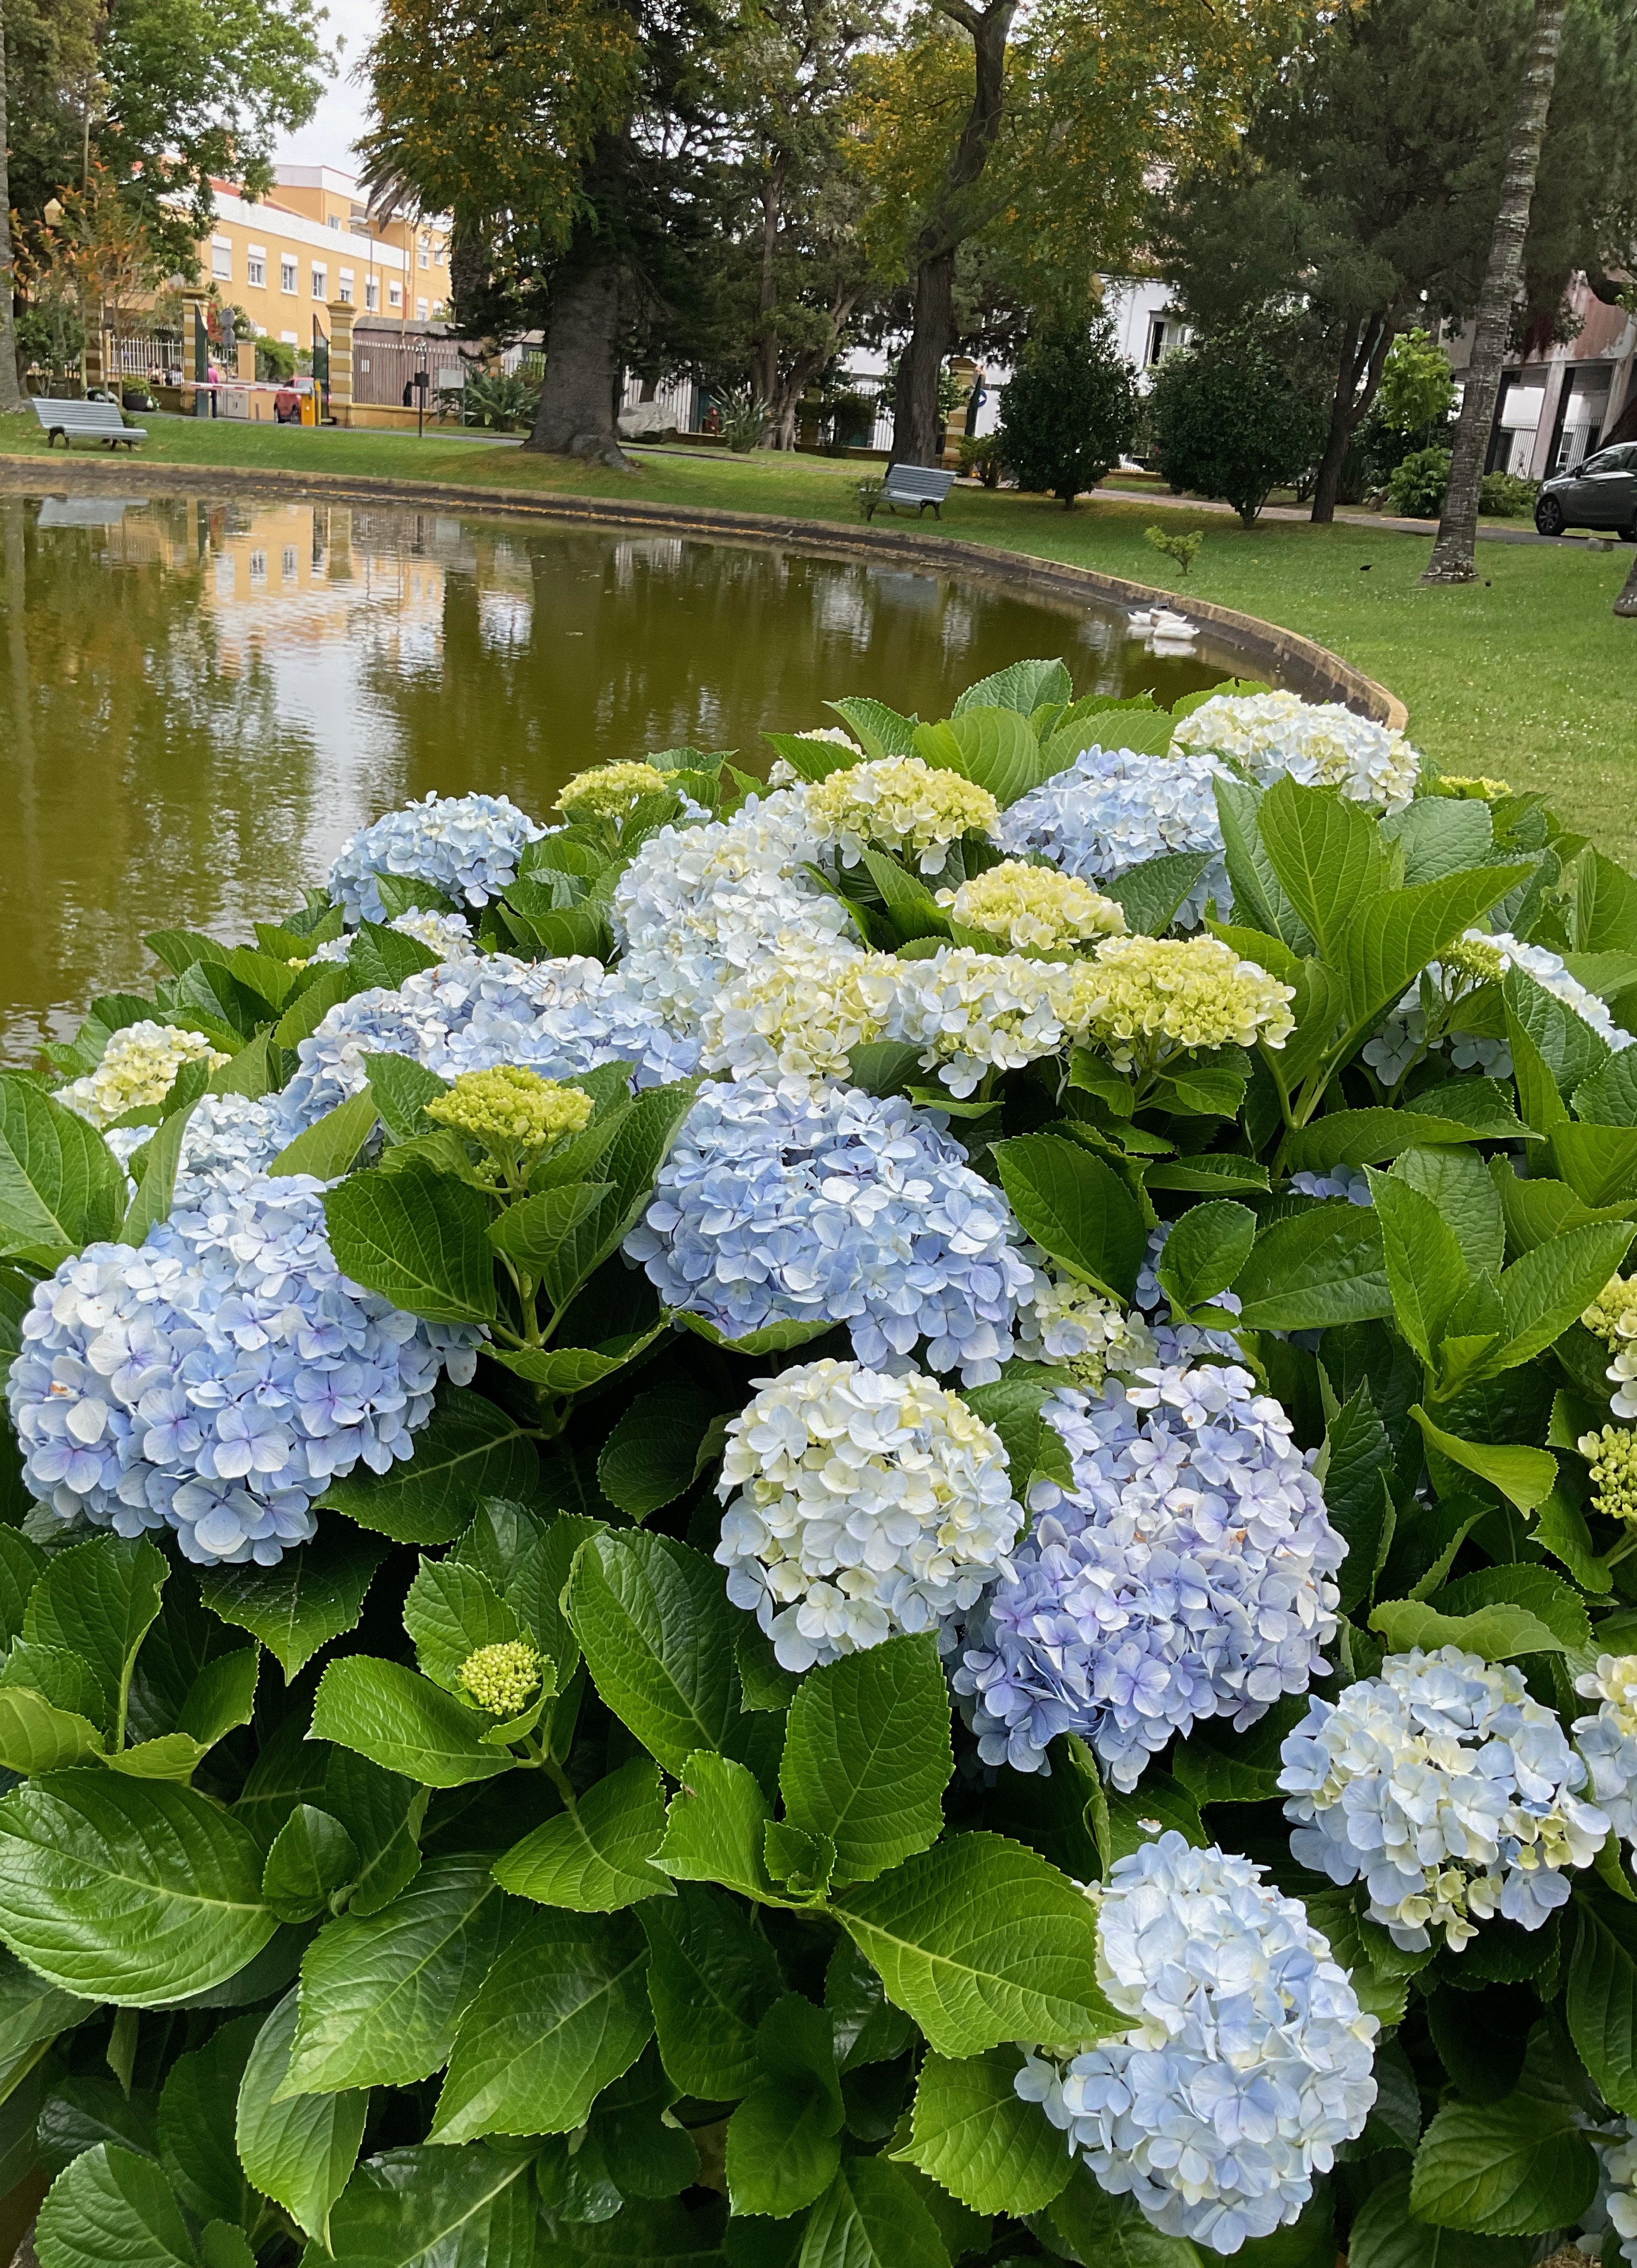 A photo of lush hydrangeas blooming in the foreground with a duck pond and manicured lawn in the background, and old buildings on the horizon.